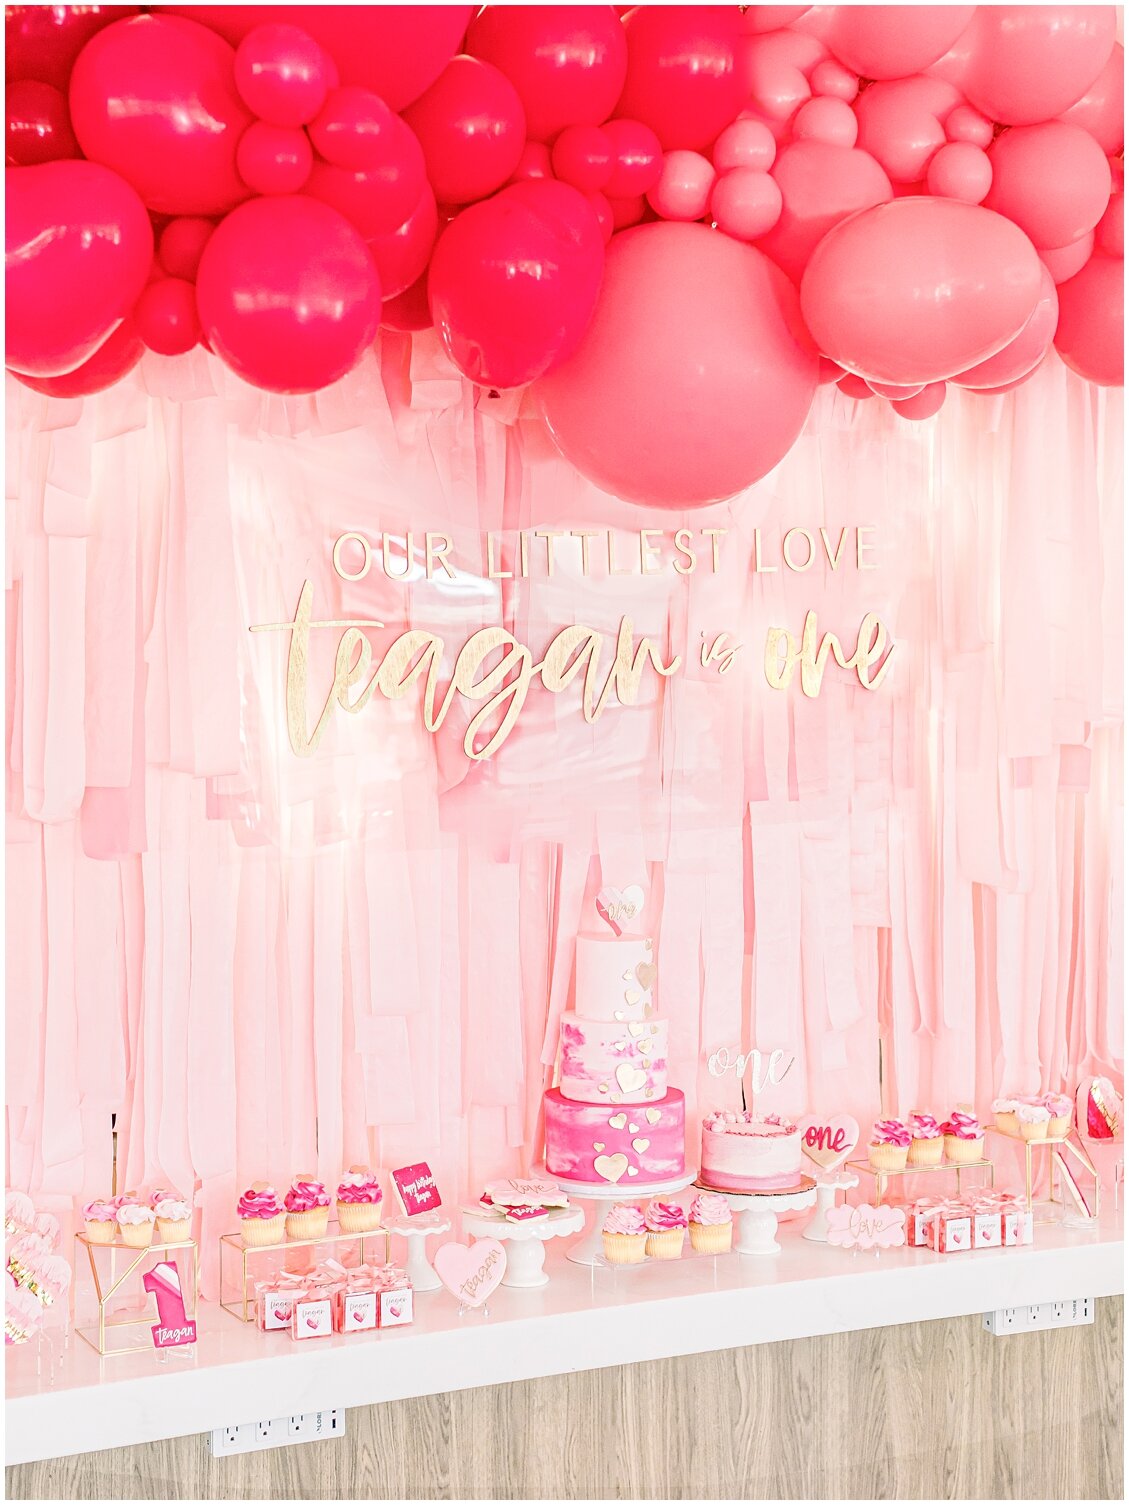 Teagan's First Birthday Party - Special Events - Orange County Birthday  Party Photographer — Jennifer S. Lim - Orange County, CA Photographer